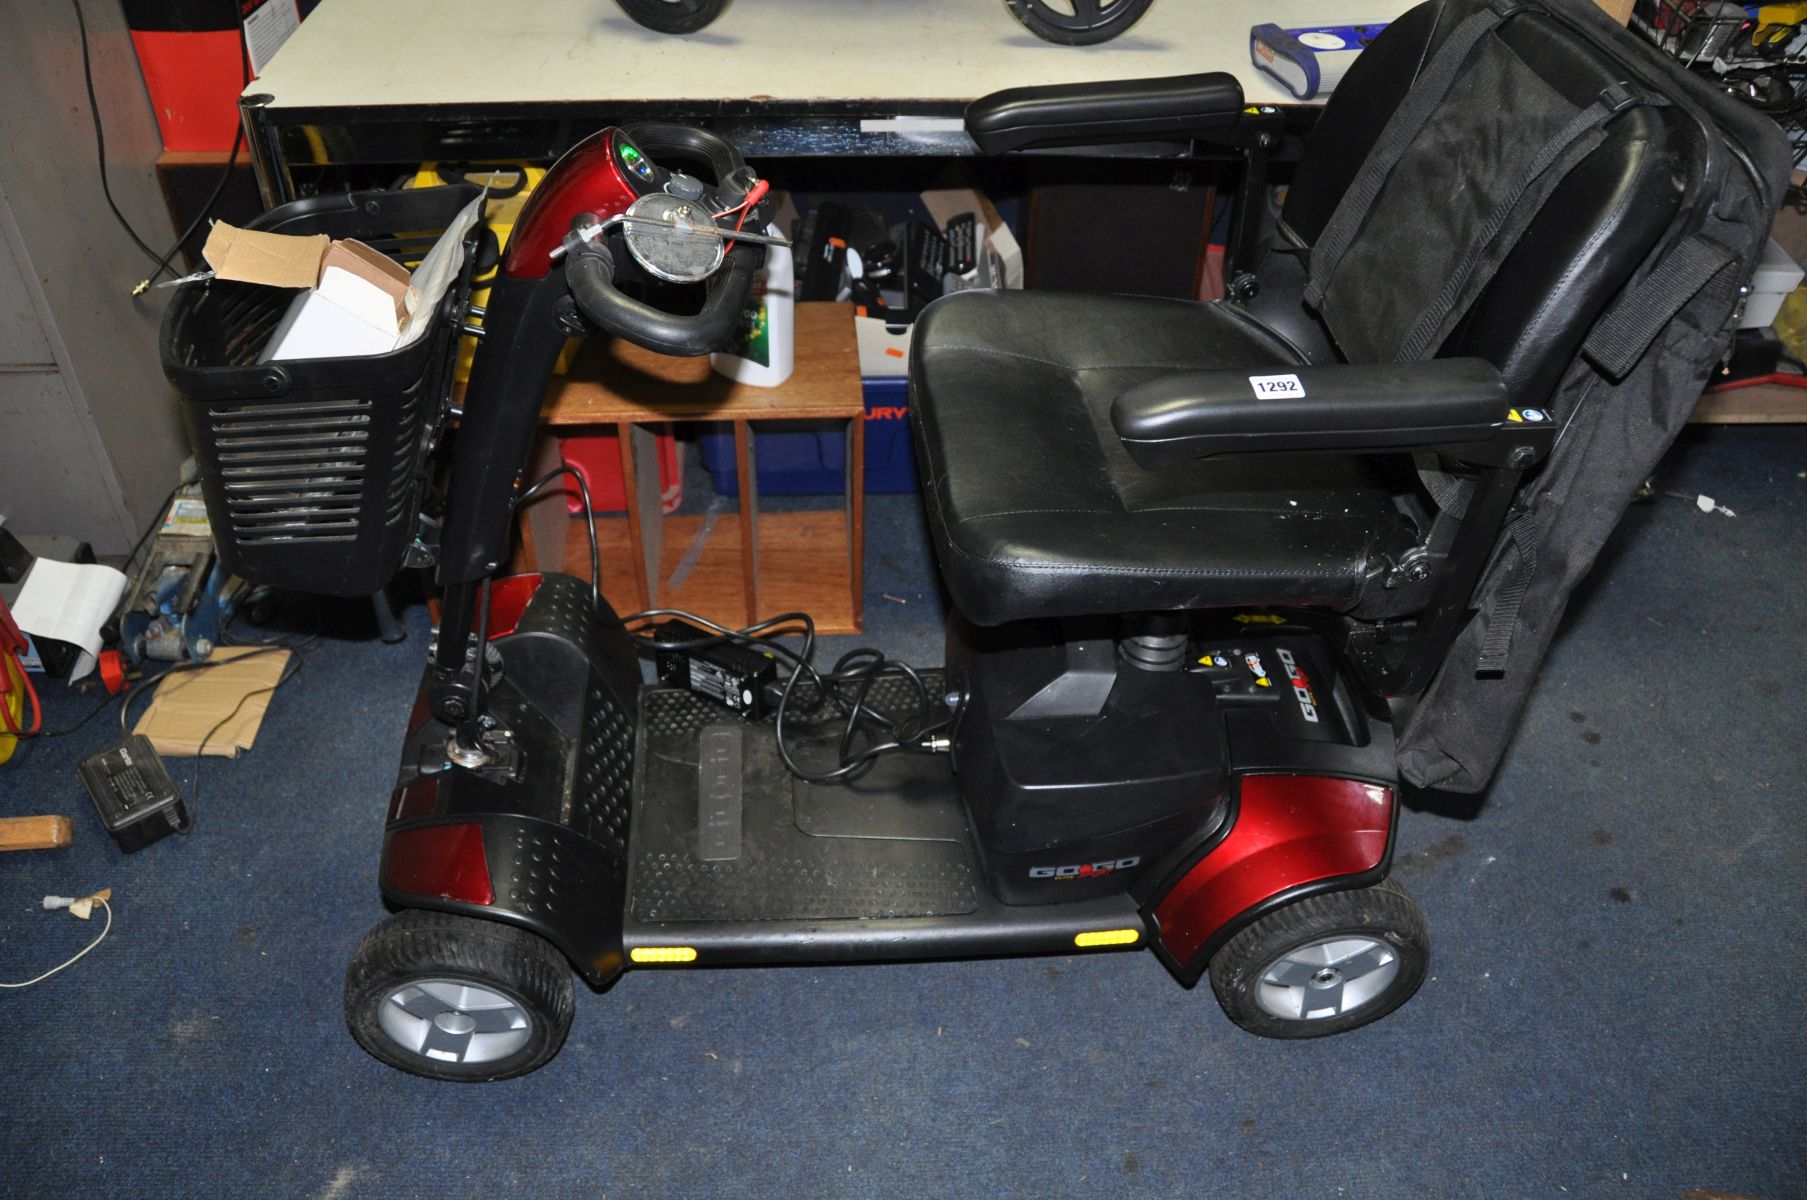 A GO GO ELITE SPORT MOBILITY SCOOTER with charger, one key, front basket and rear bag along with a - Image 2 of 3